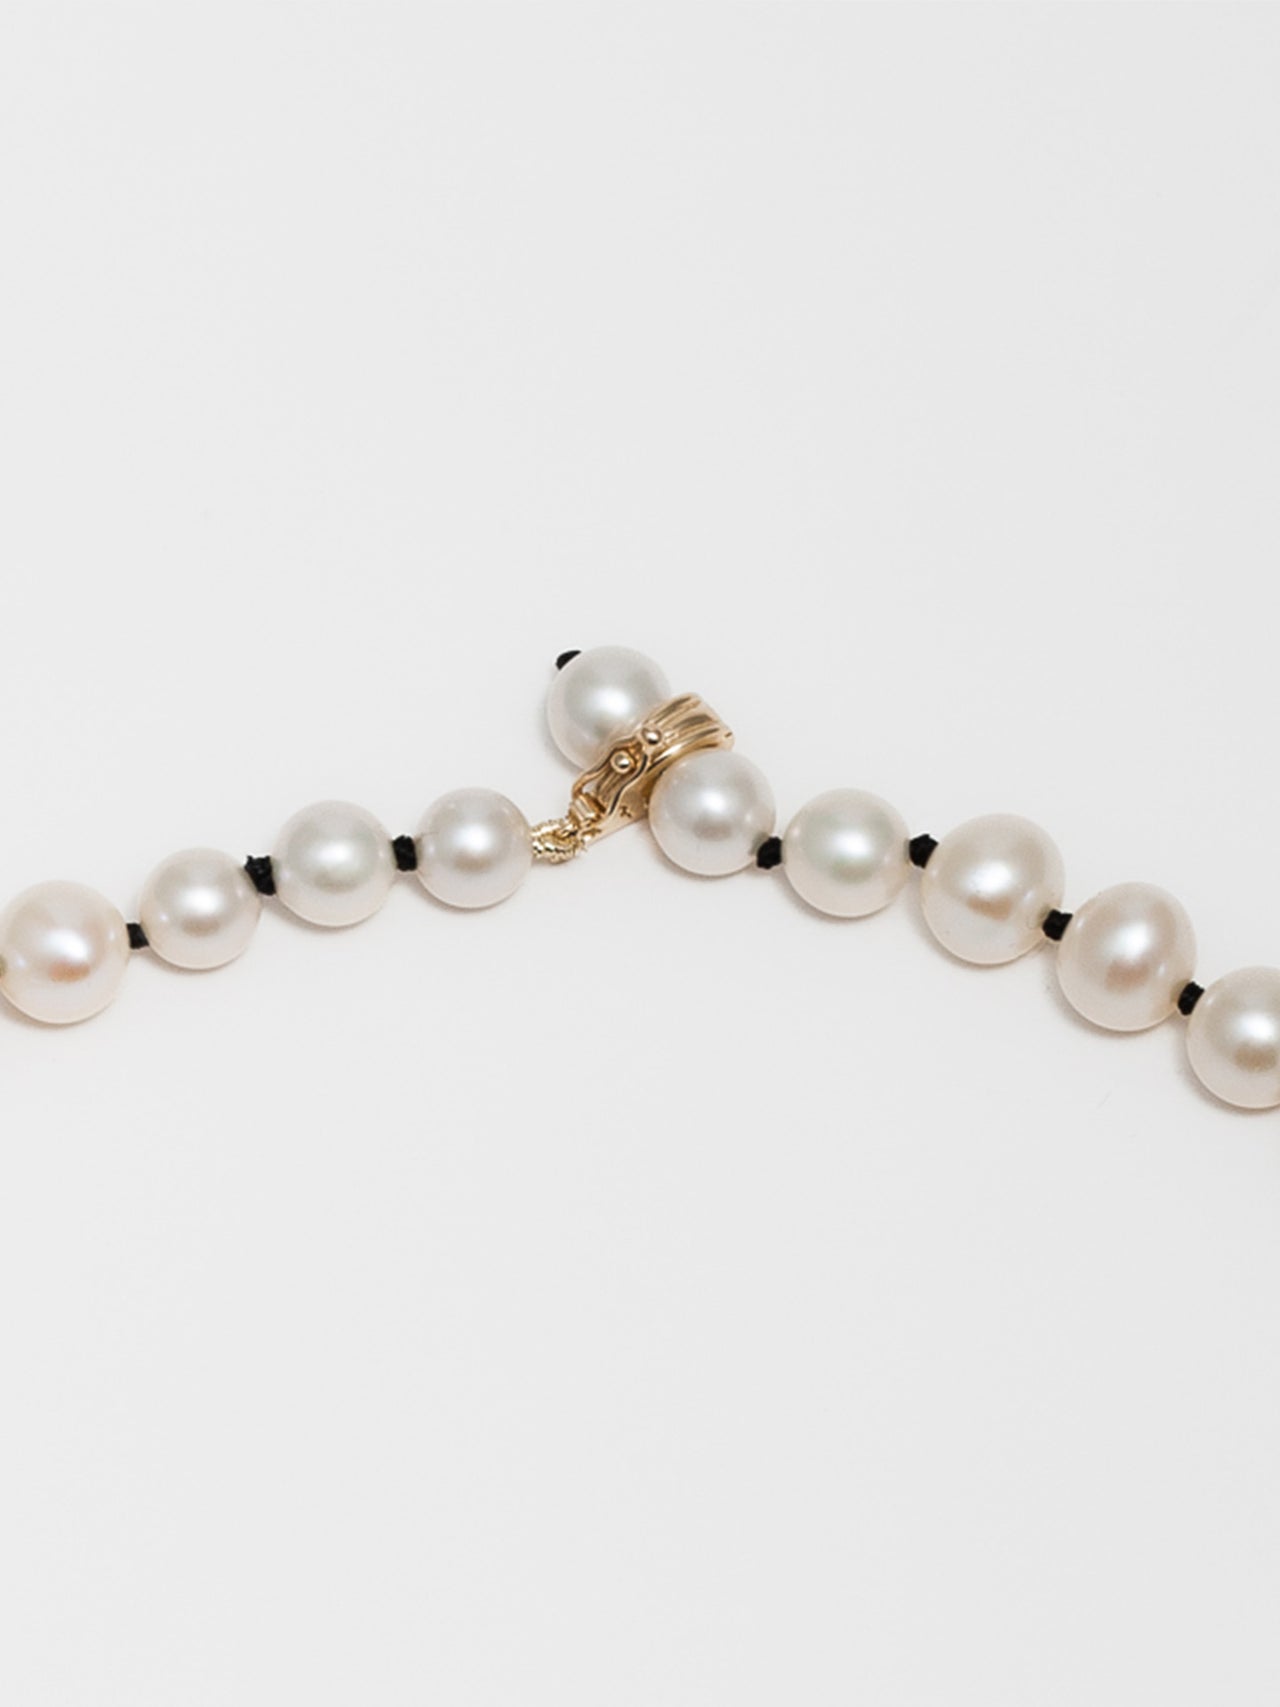 14kt Yellow Gold Boujee Pearl Necklace or Bracelet, up-close picture of enhancer clasp.